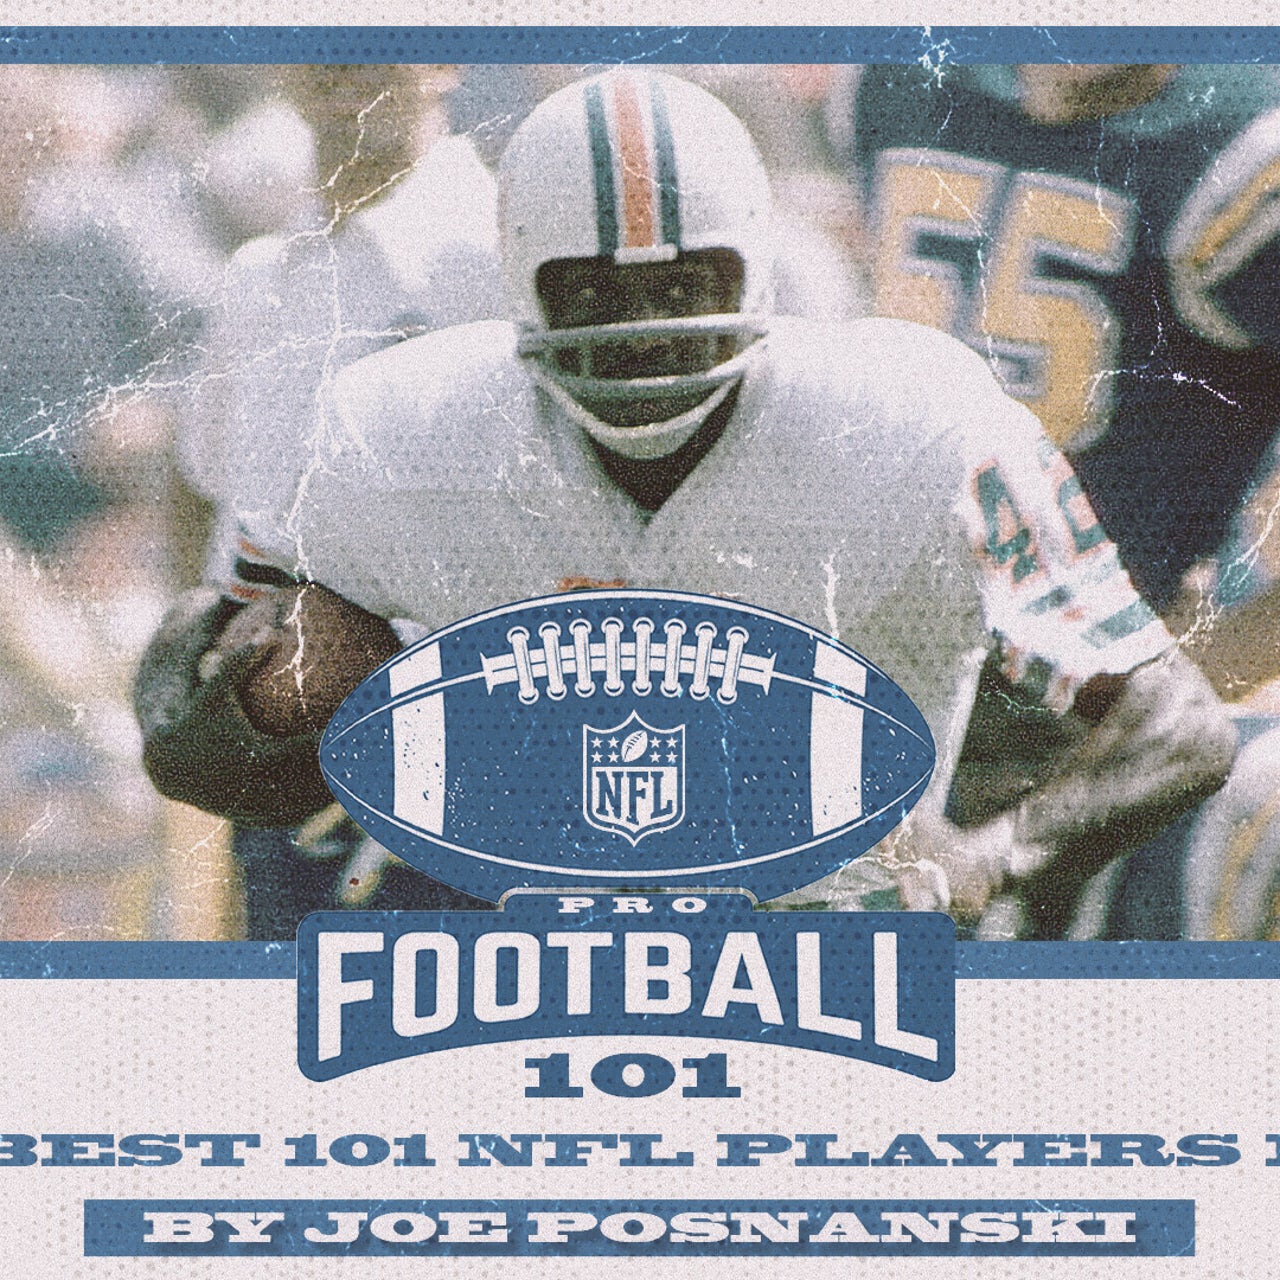 Today in Pro Football History: 1970: Dolphins Obtain Paul Warfield from  Browns